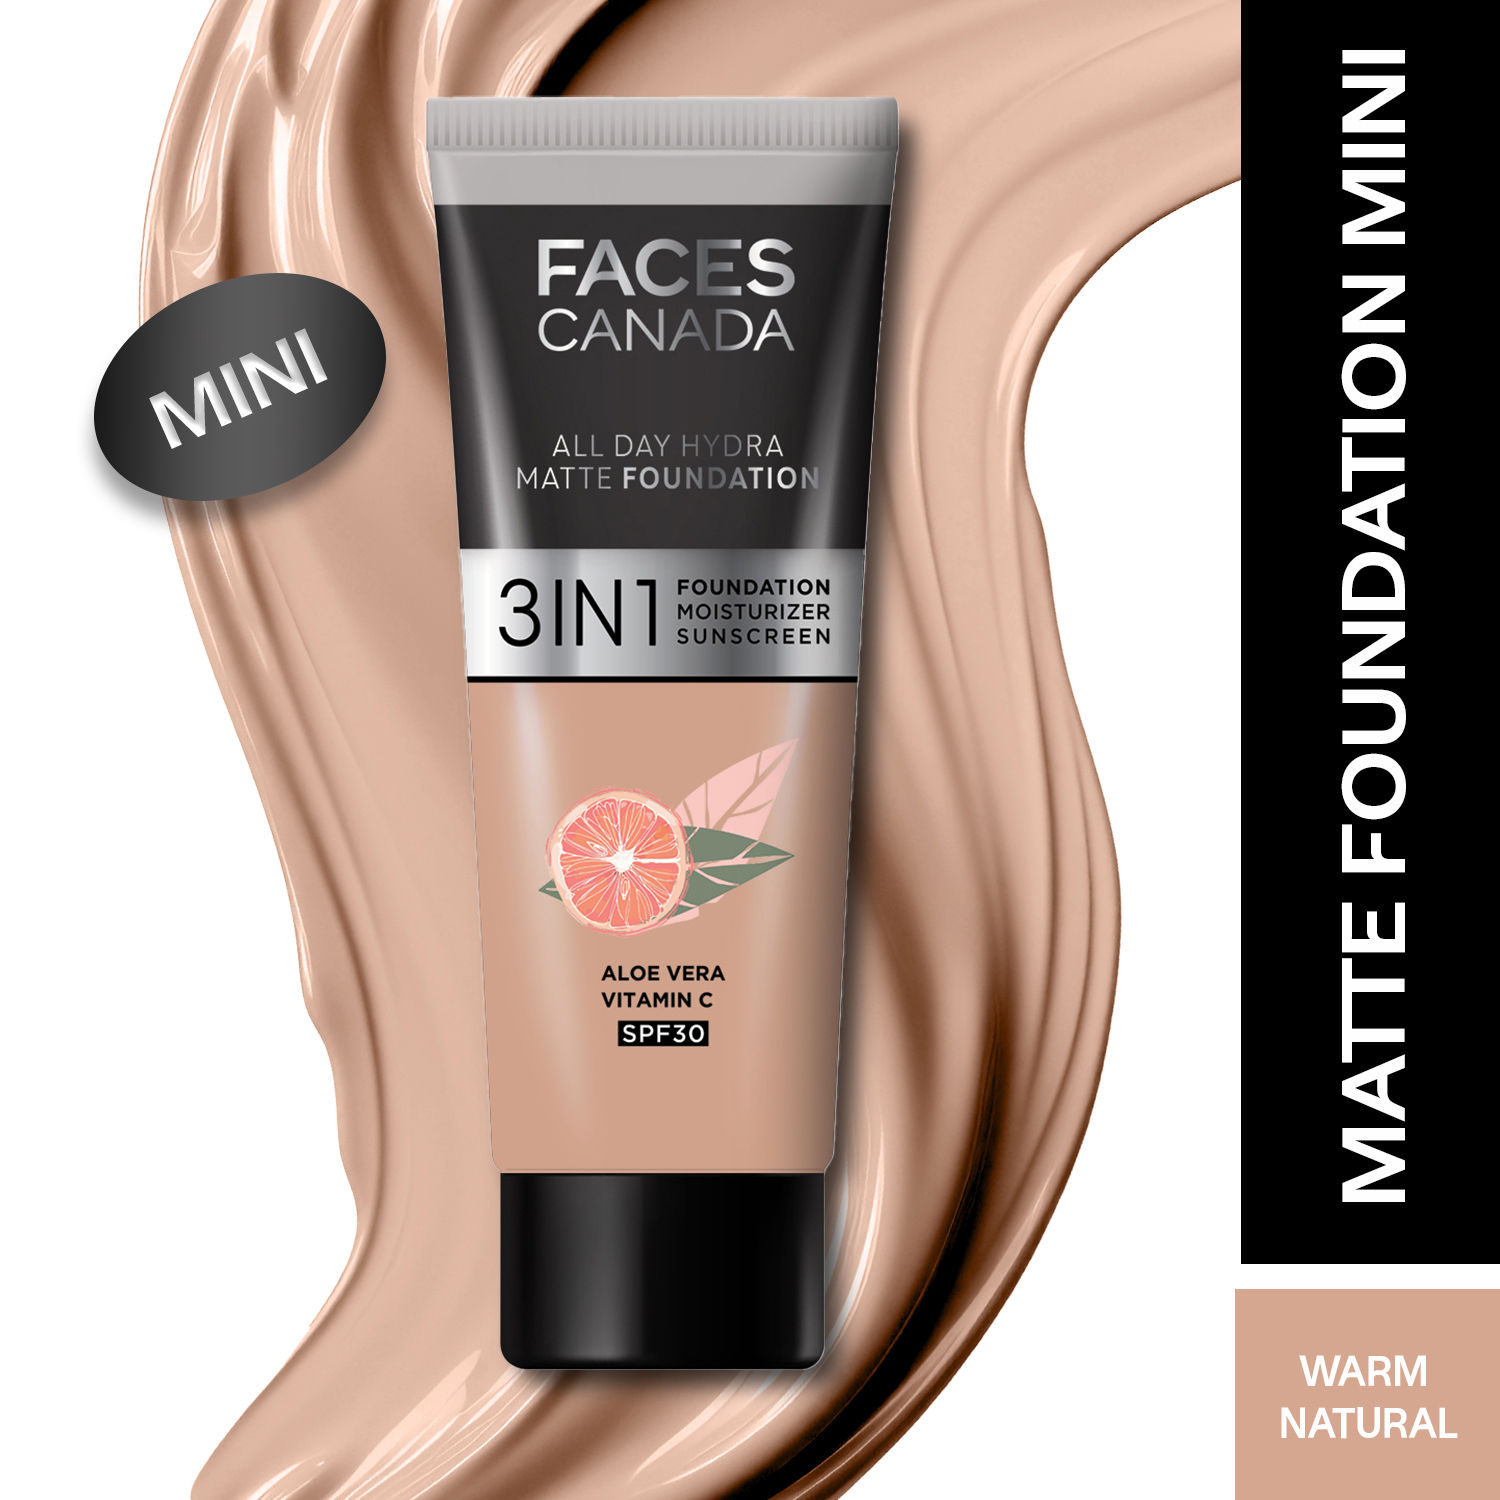 https://media6.ppl-media.com//tr:h-750,w-750,c-at_max,dpr-2/static/img/product/357889/faces-canada-all-day-hydra-matte-foundation-warm-natural-021-15ml-spf-30-24hr-hydration-aloe-hydration-oil-free-matte-vit-c-paraben-free-alcohol-free-no-mineral-oil-vegan_10_display_1697438525_7c2e8f45.jpg